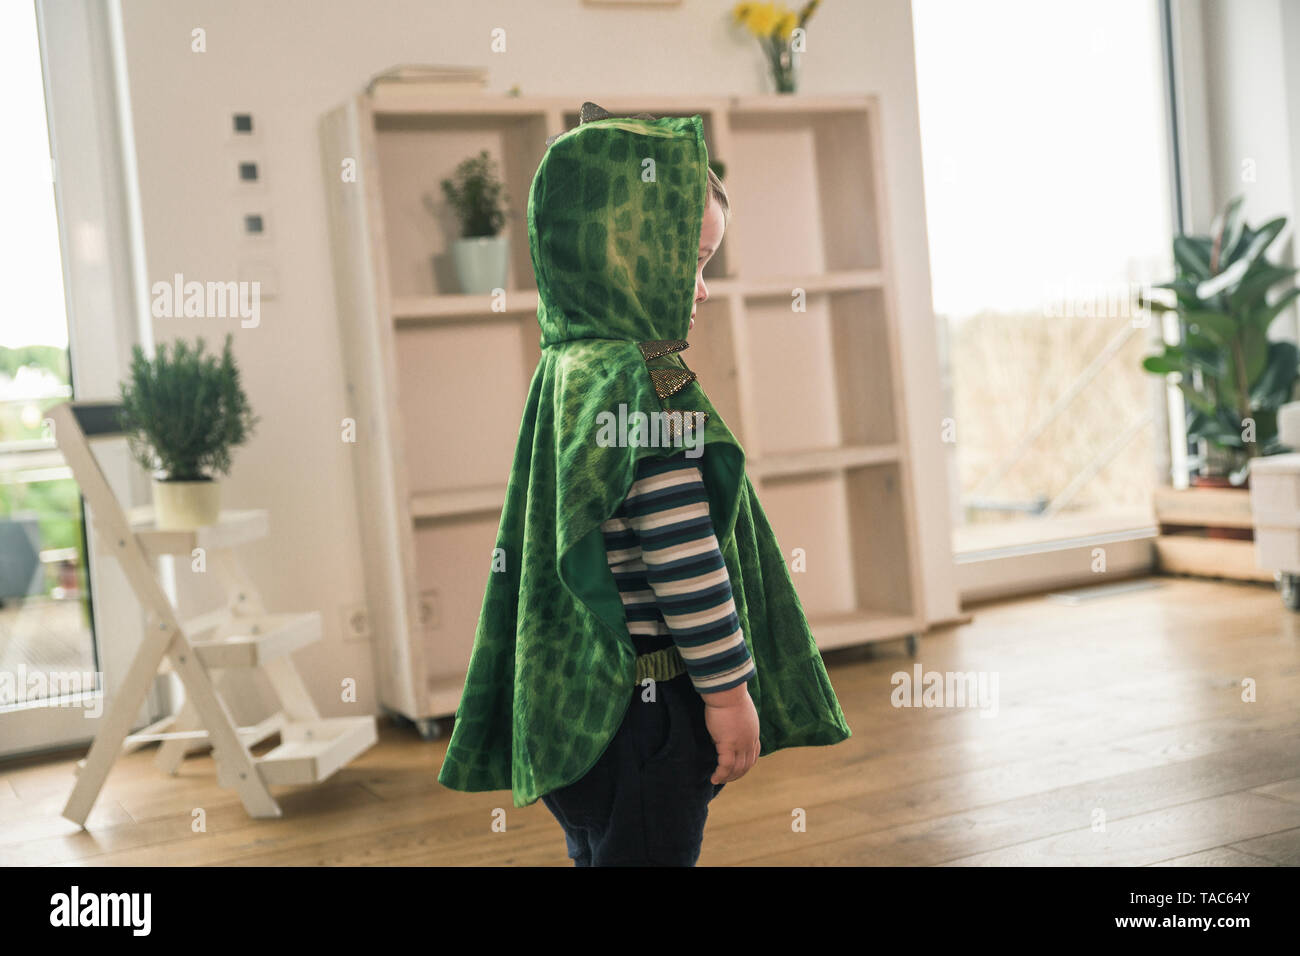 Boy in a crocodile costume at home Stock Photo